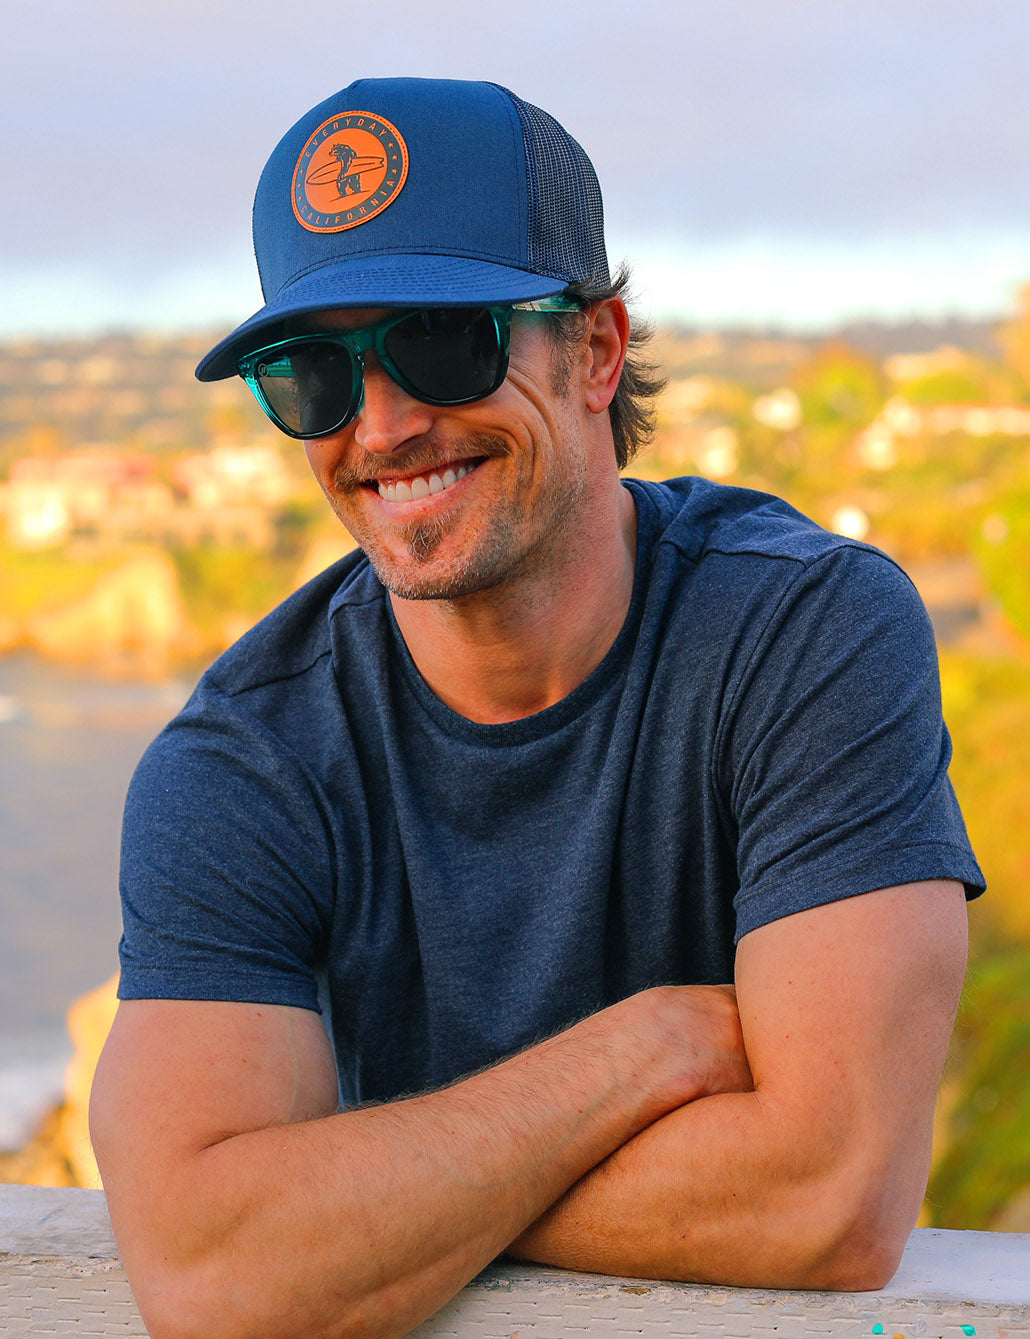 Photo of a man wearing a hat and sunglasses smiling at the camera.